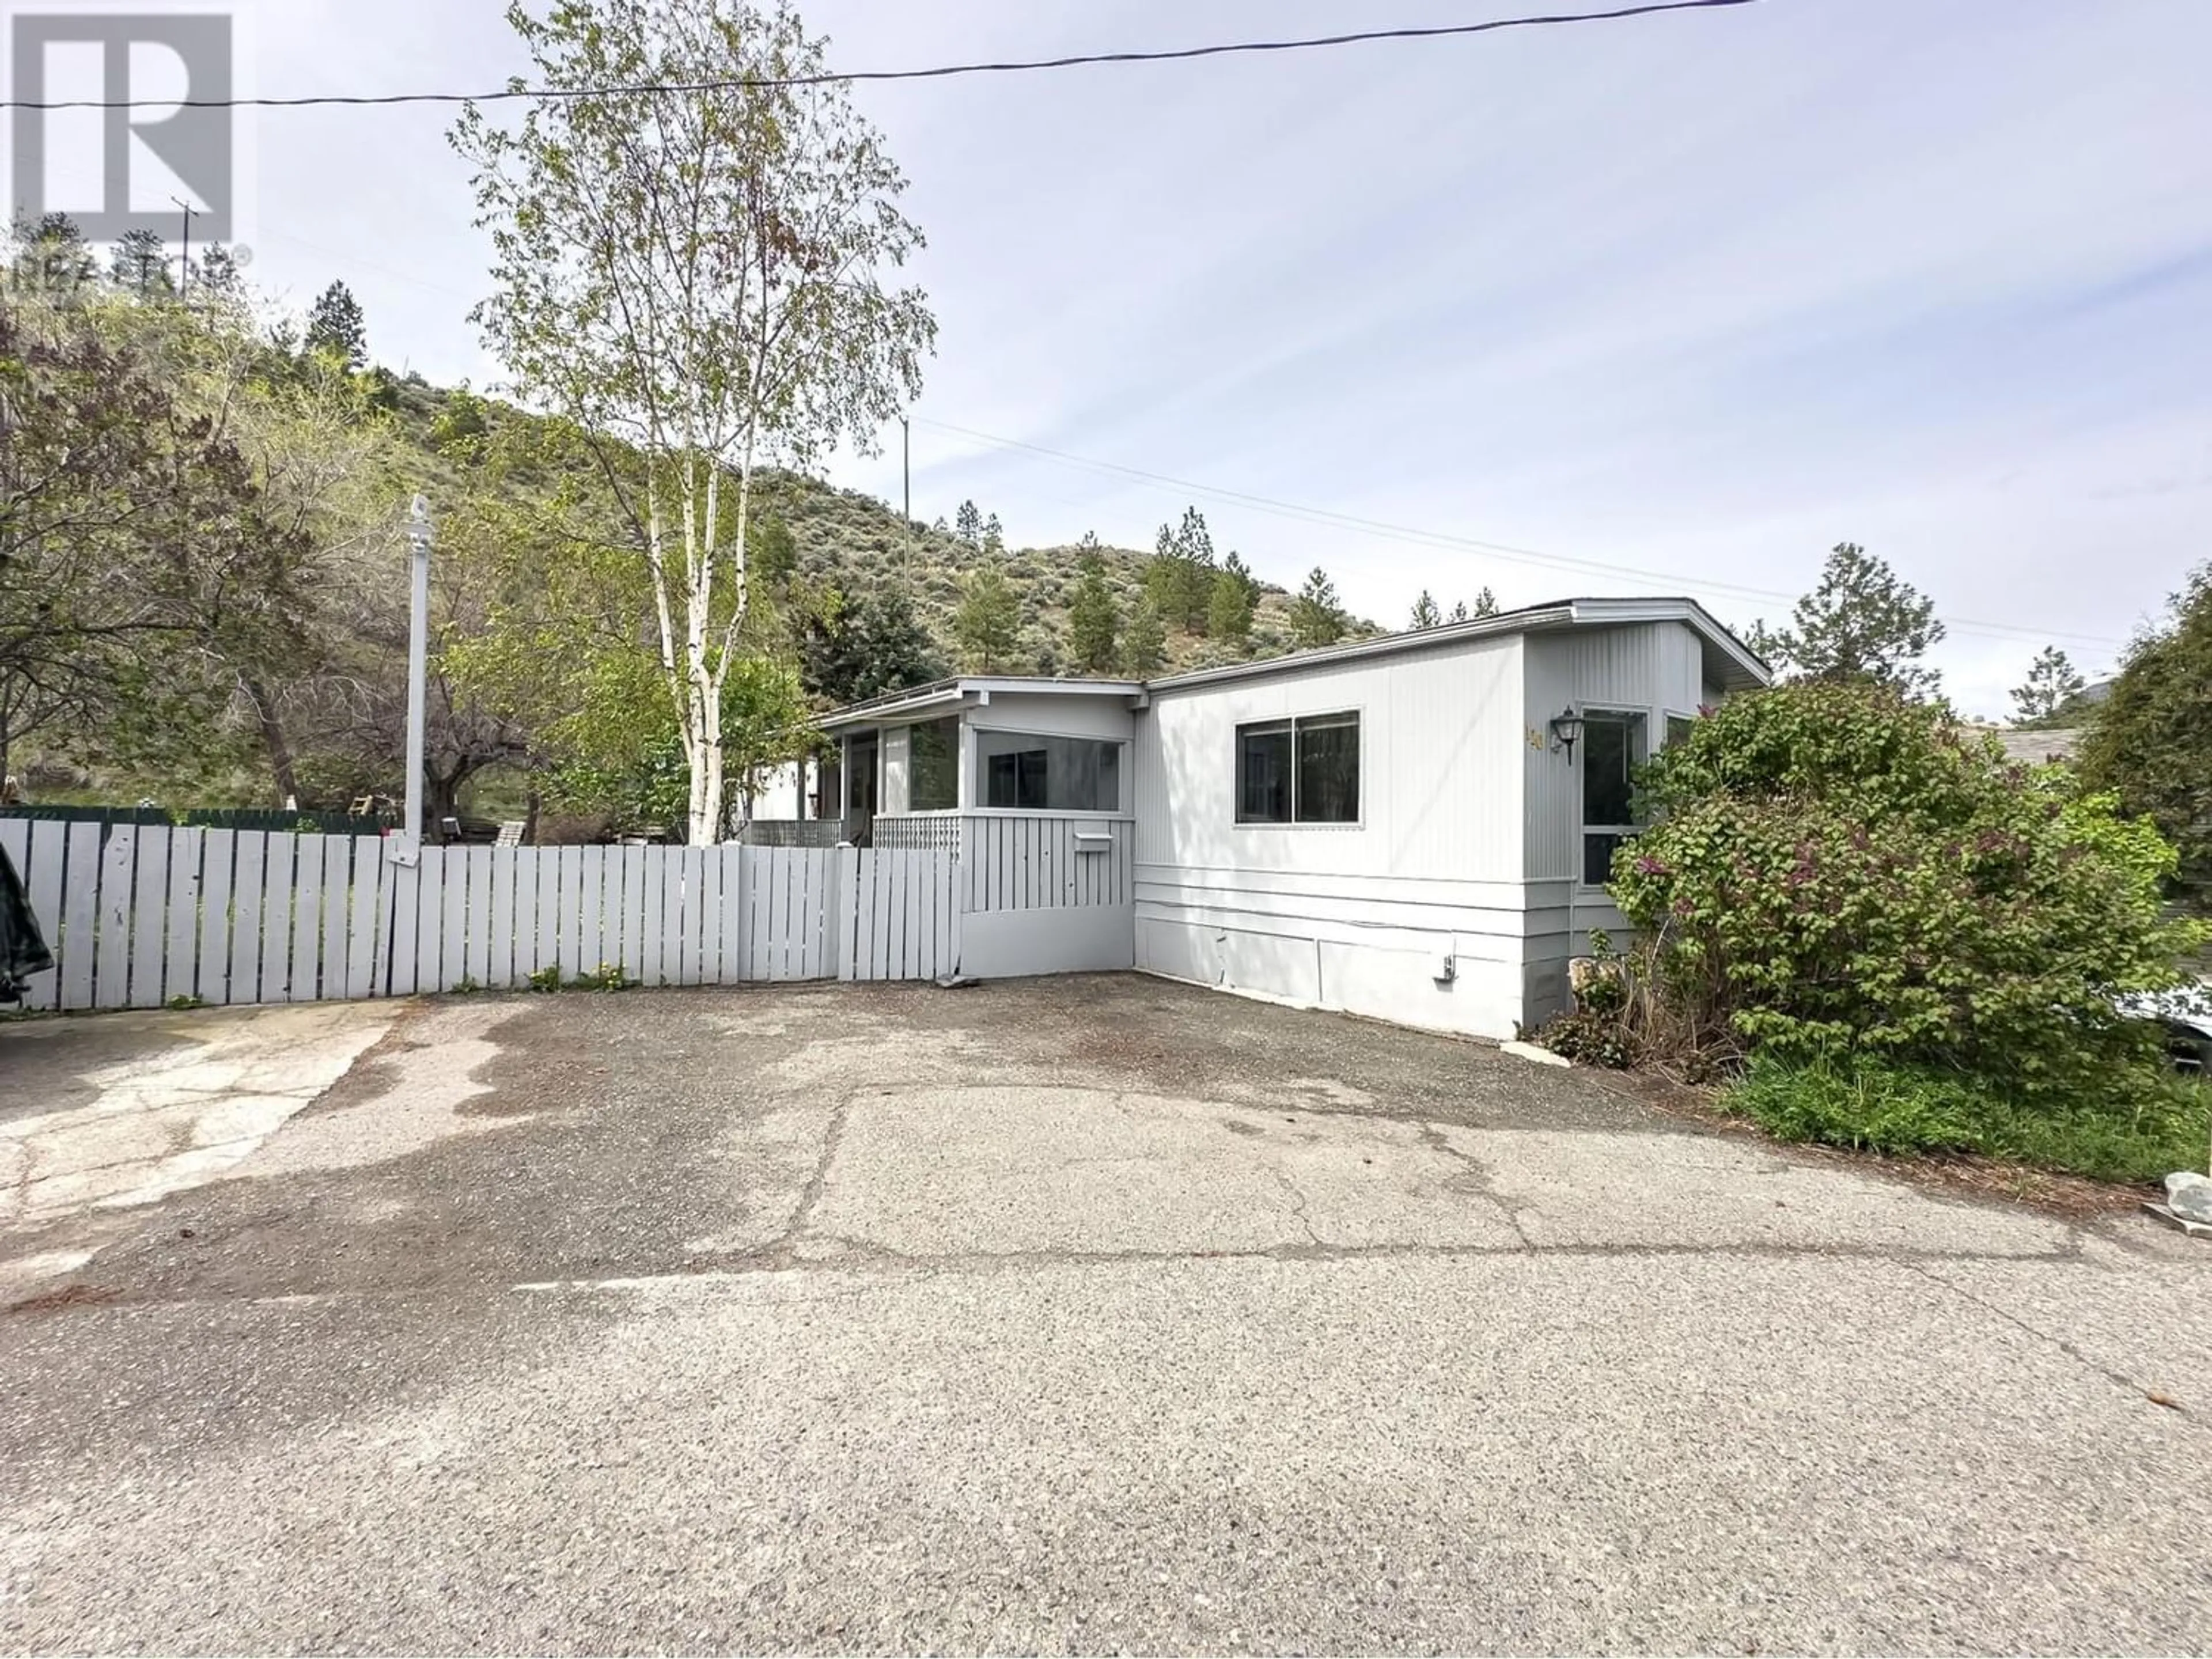 Outside view for 120-1175 ROSE HILL ROAD, Kamloops British Columbia V2E1G9